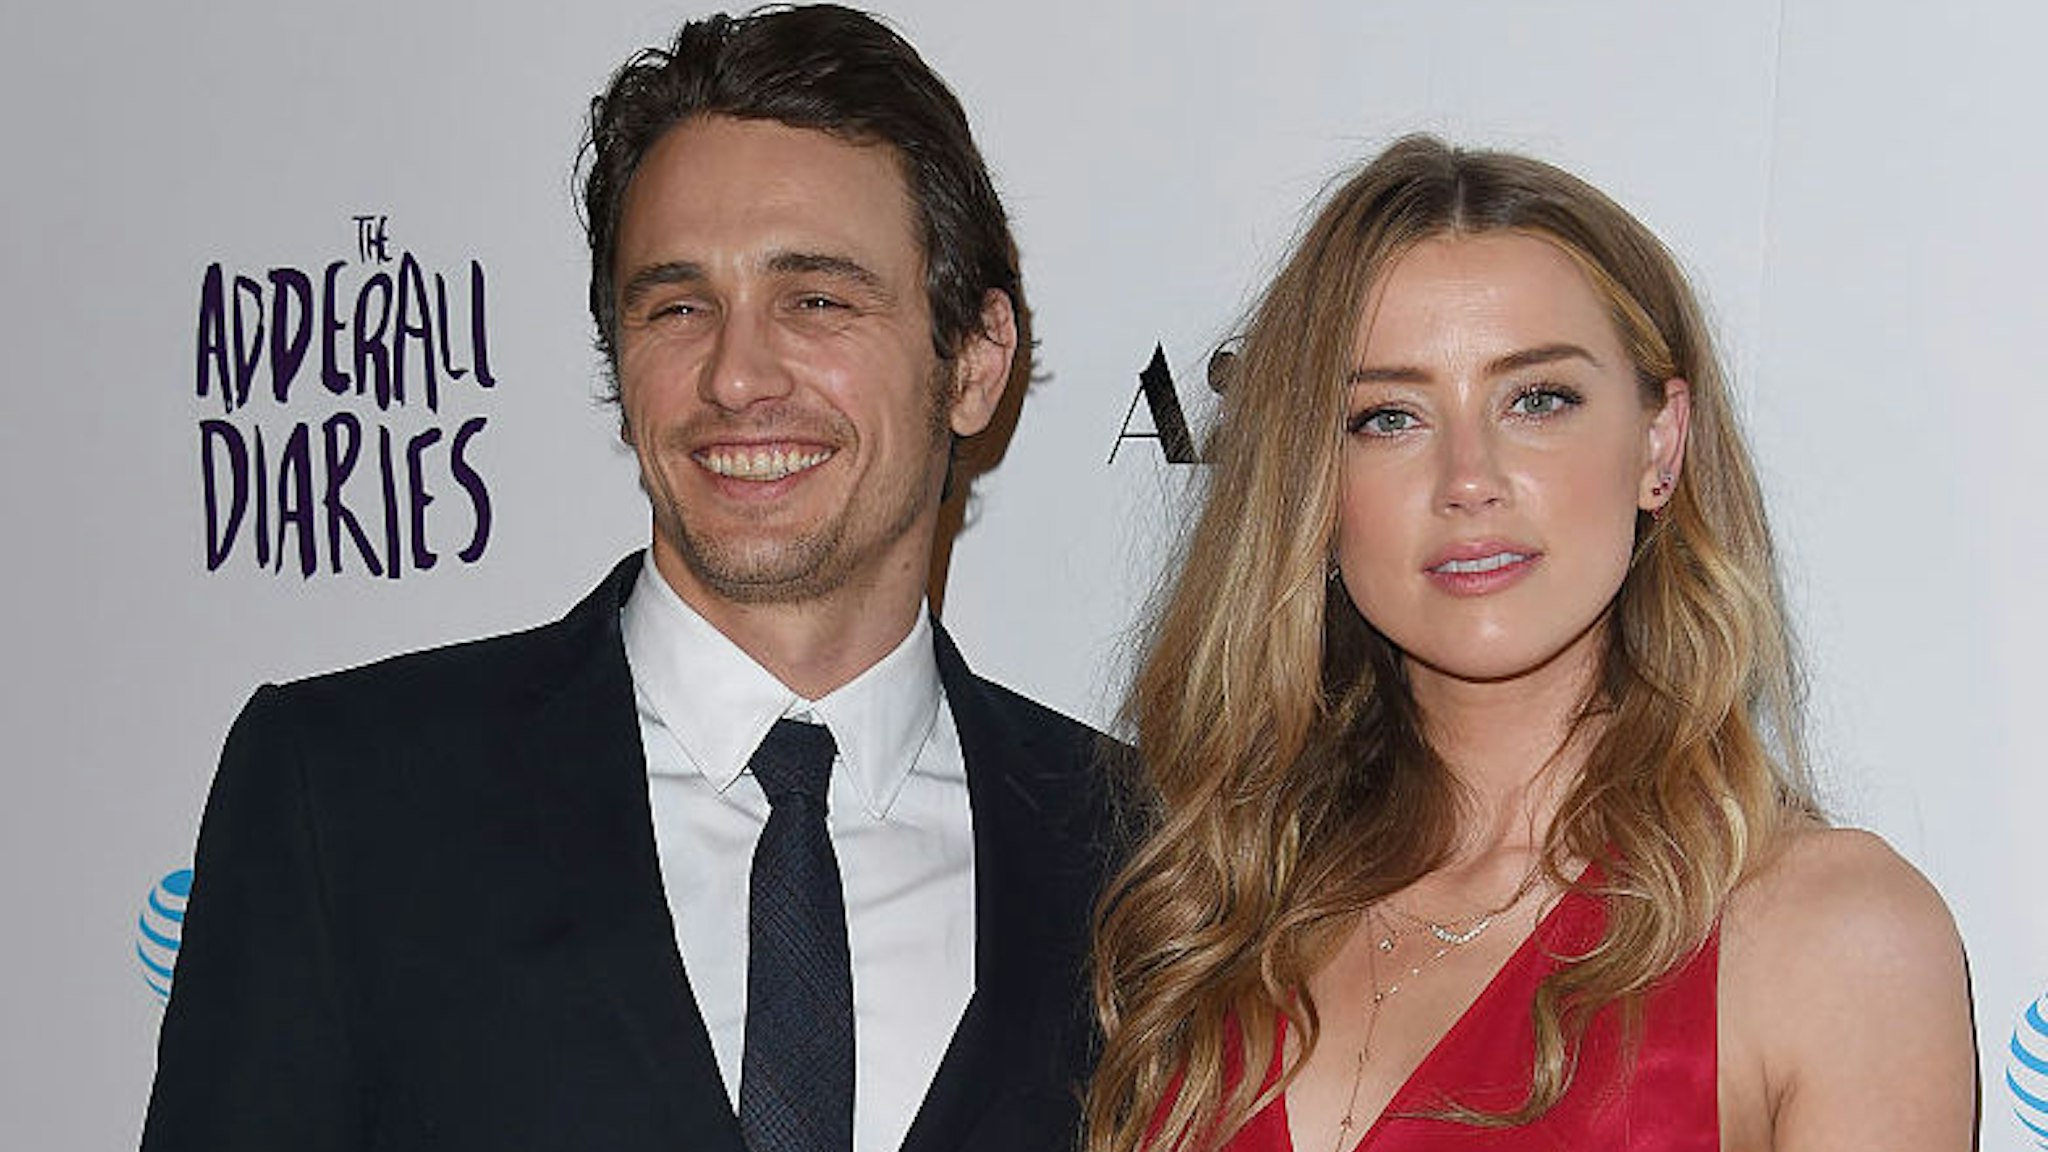 Actors James Franco and Amber Heard arrive at A24/DIRECTV's 'The Adderall Diaries' Premiere at ArcLight Hollywood on April 12, 2016 in Hollywood, California.